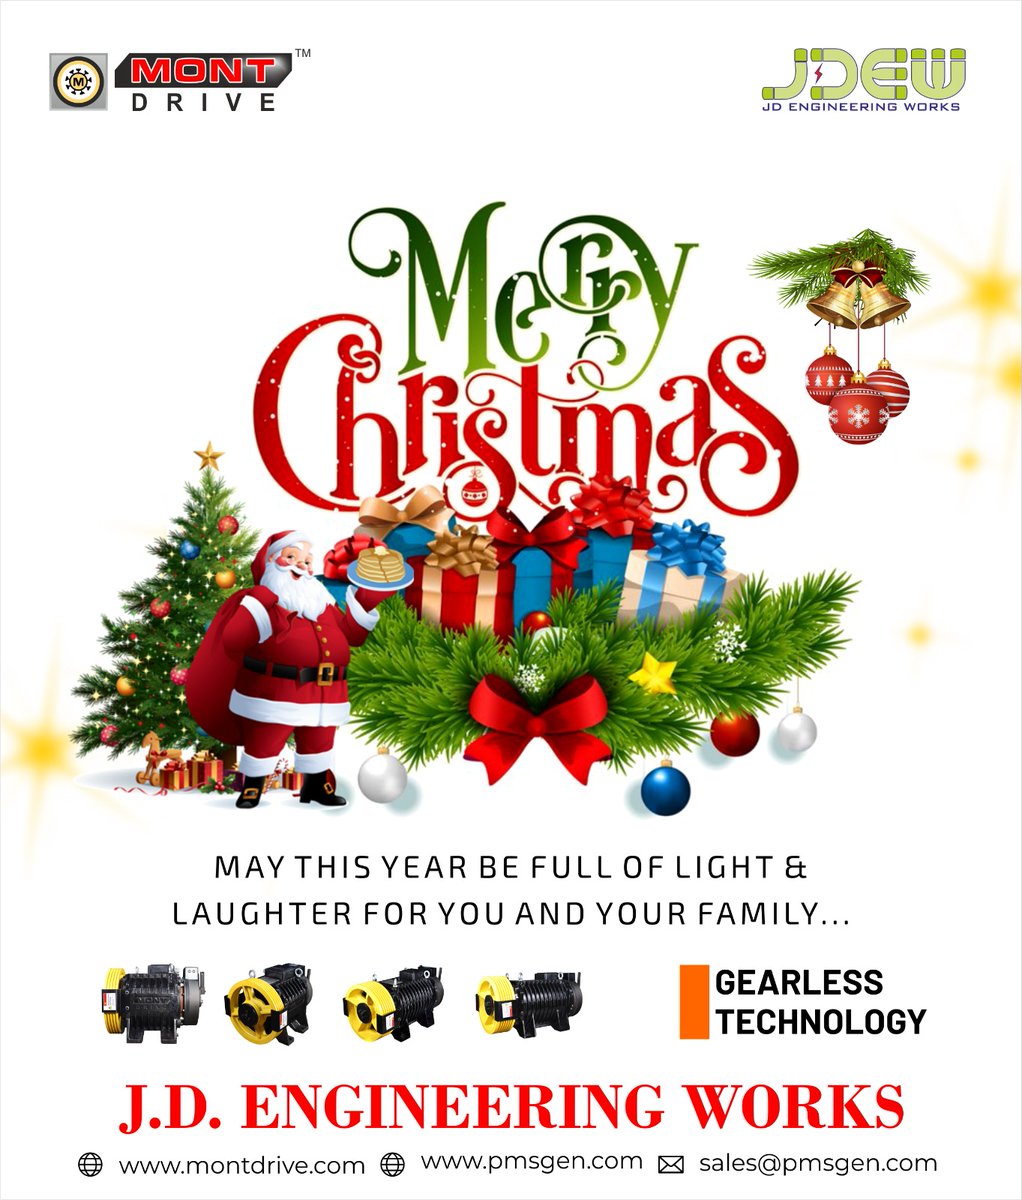 J.D. Engineering Works team wishes you all a Merry Christmas!
#Christmas #christmas2023 #christmasmagic #merrychristmas #merrychristmas2023 #merryxmas #festivalseason #FestiveSeason2023 #greenchristmas #jdengineeringworks #montdrive #motor #machines #machinery #elevatorindustry